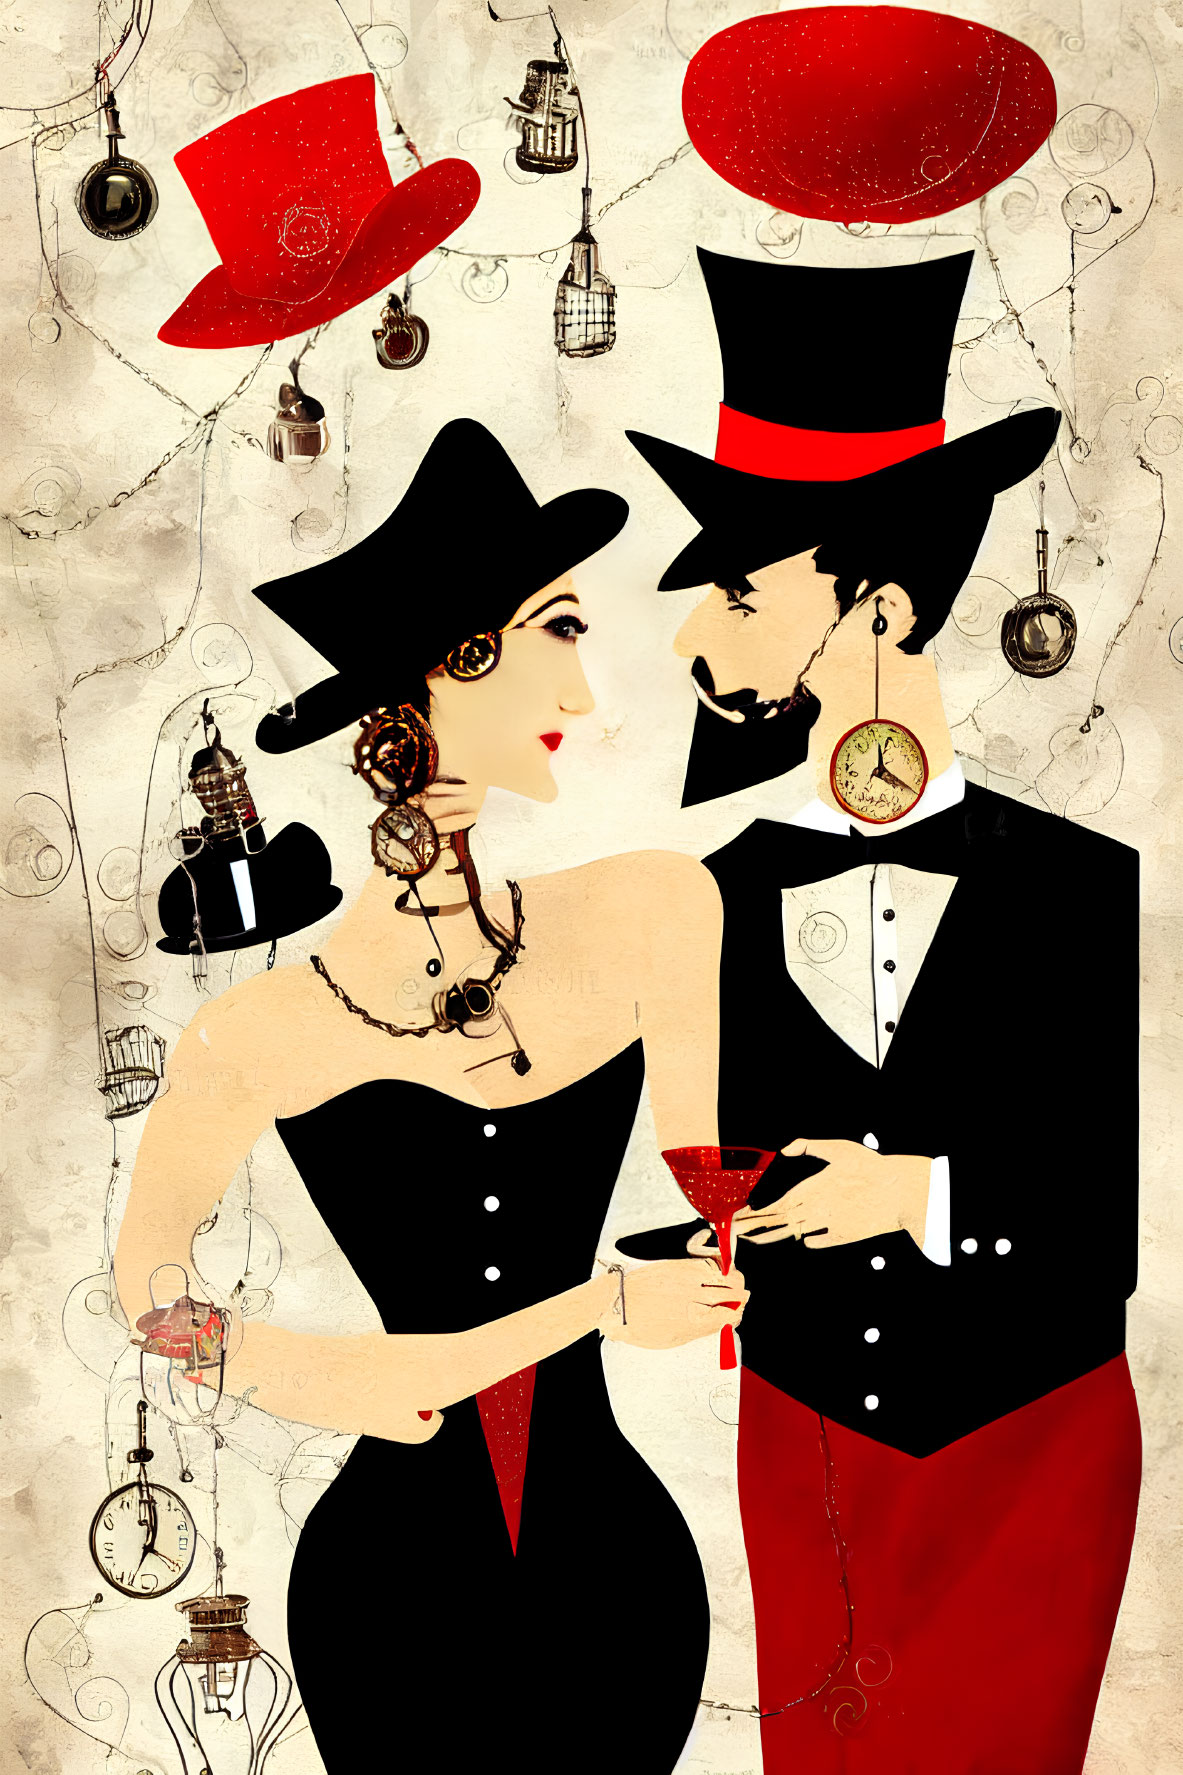 Vintage-themed illustration of elegant couple in red top hat and tails, black dress and hat, holding drinks